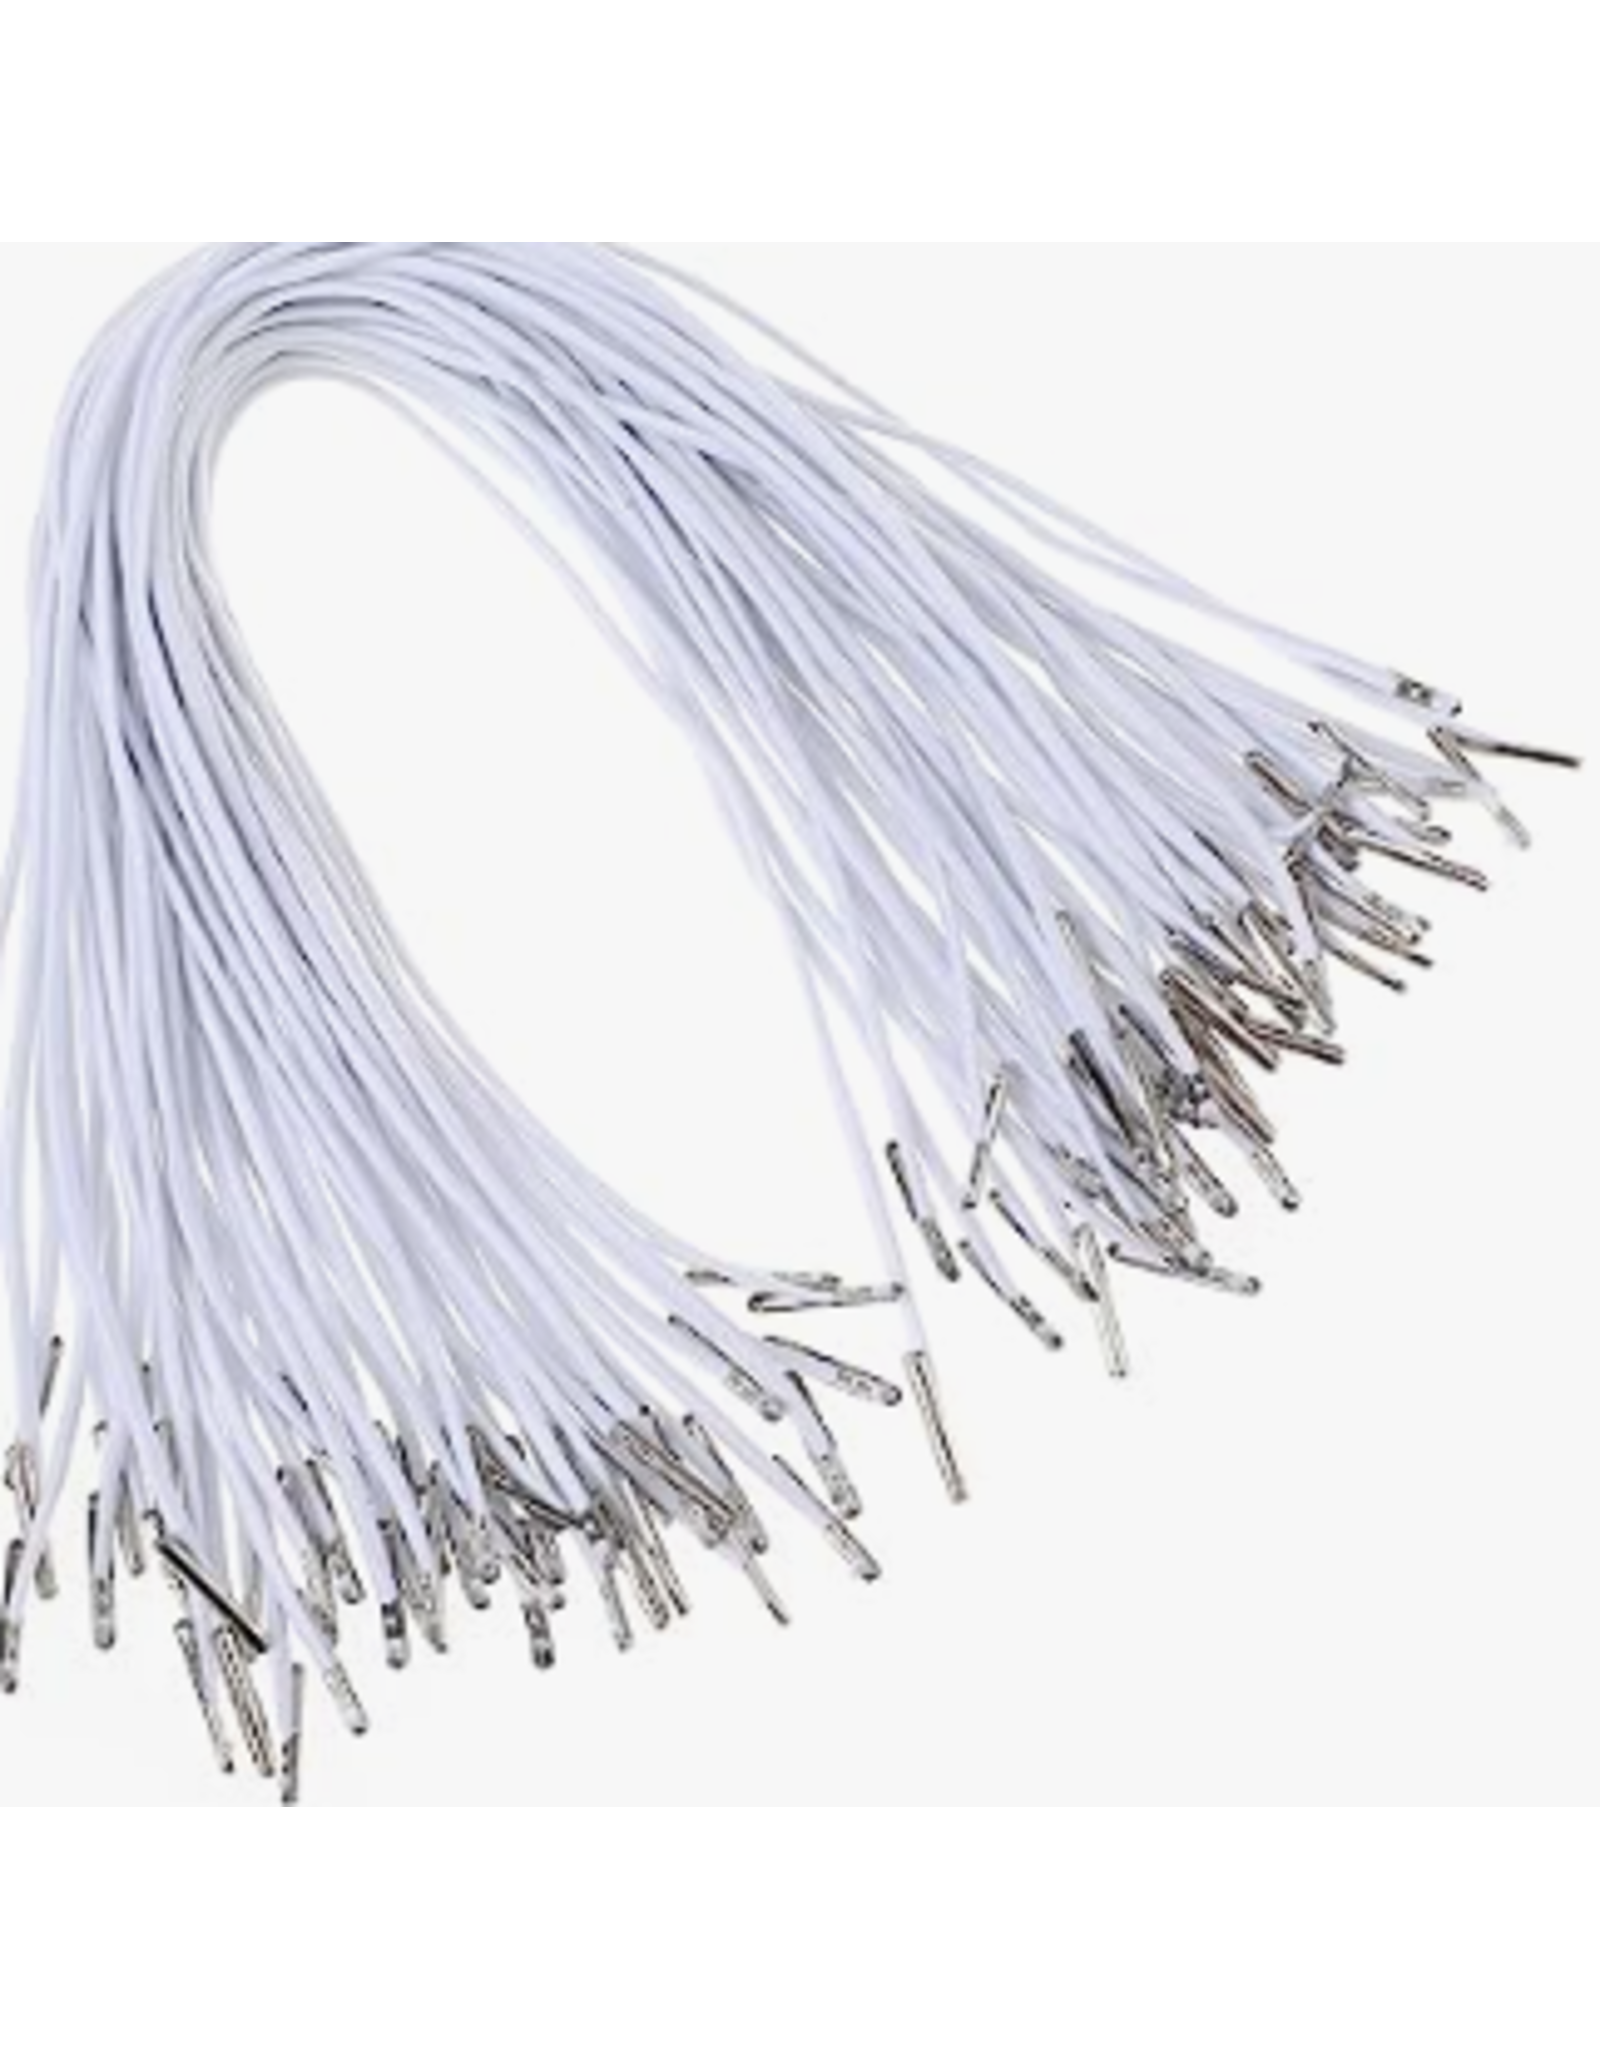 Elastic Cord with Metal Ends